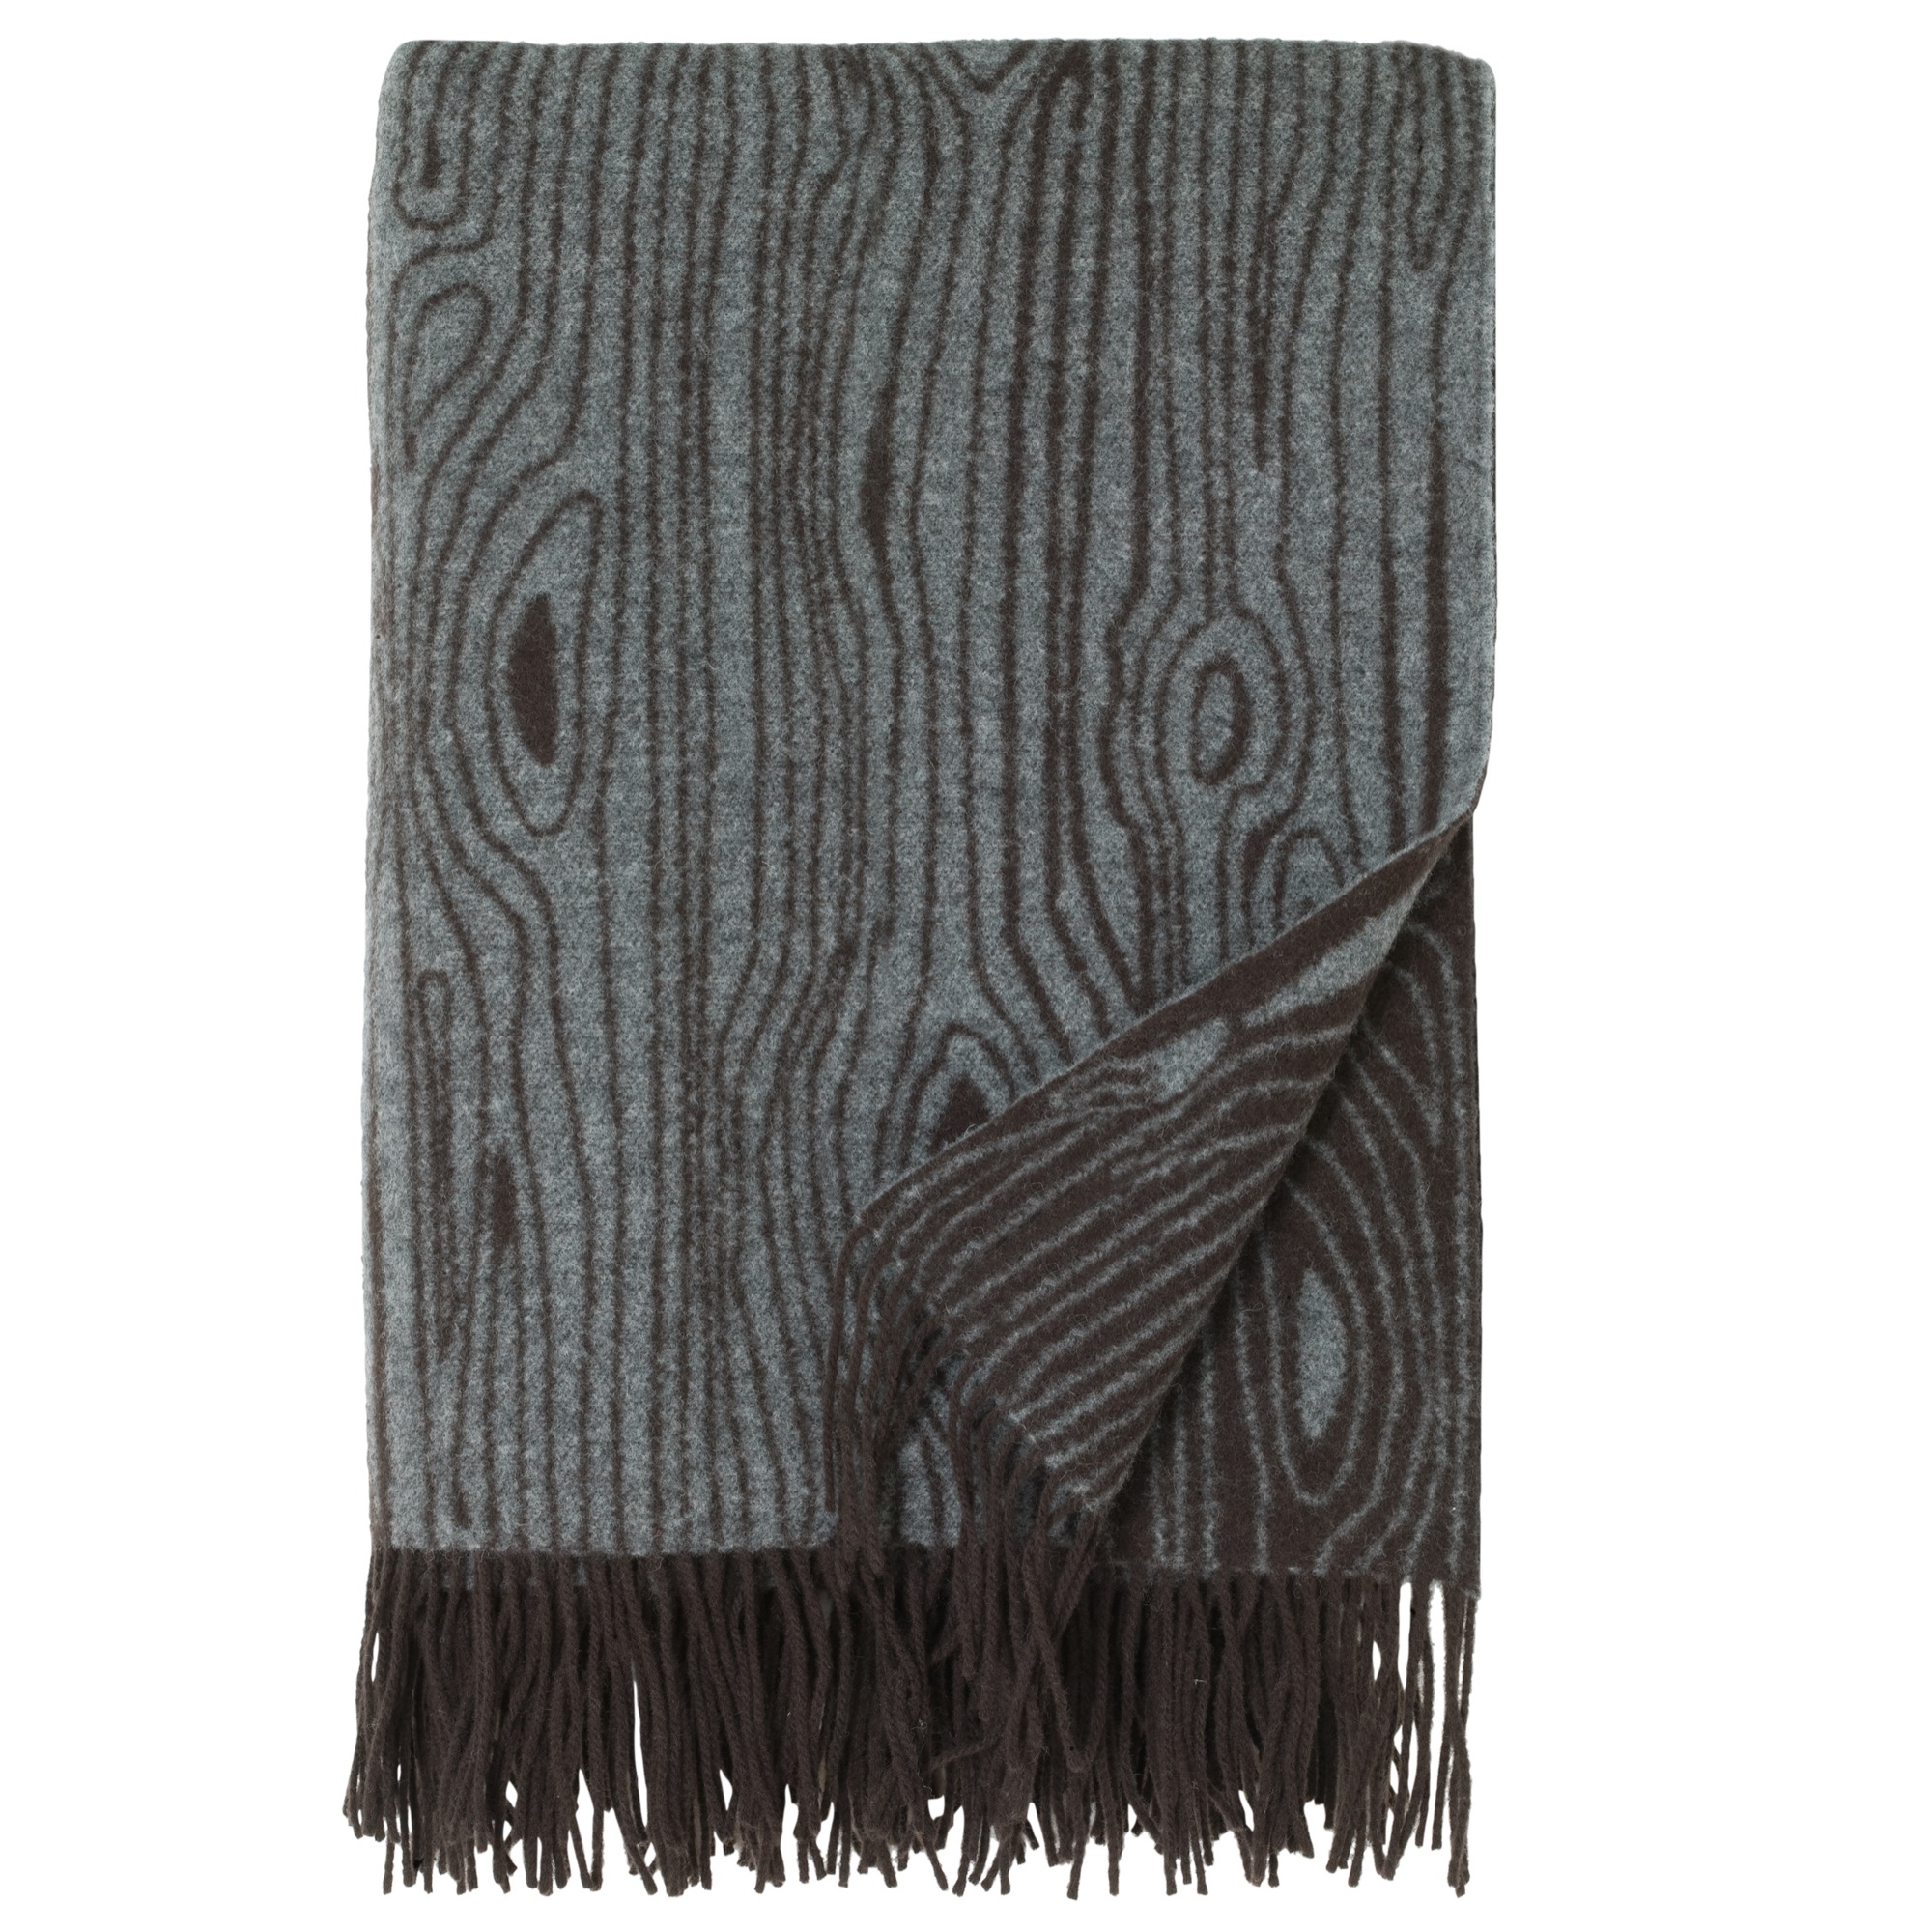 Woolywood throw by Donna Wilson